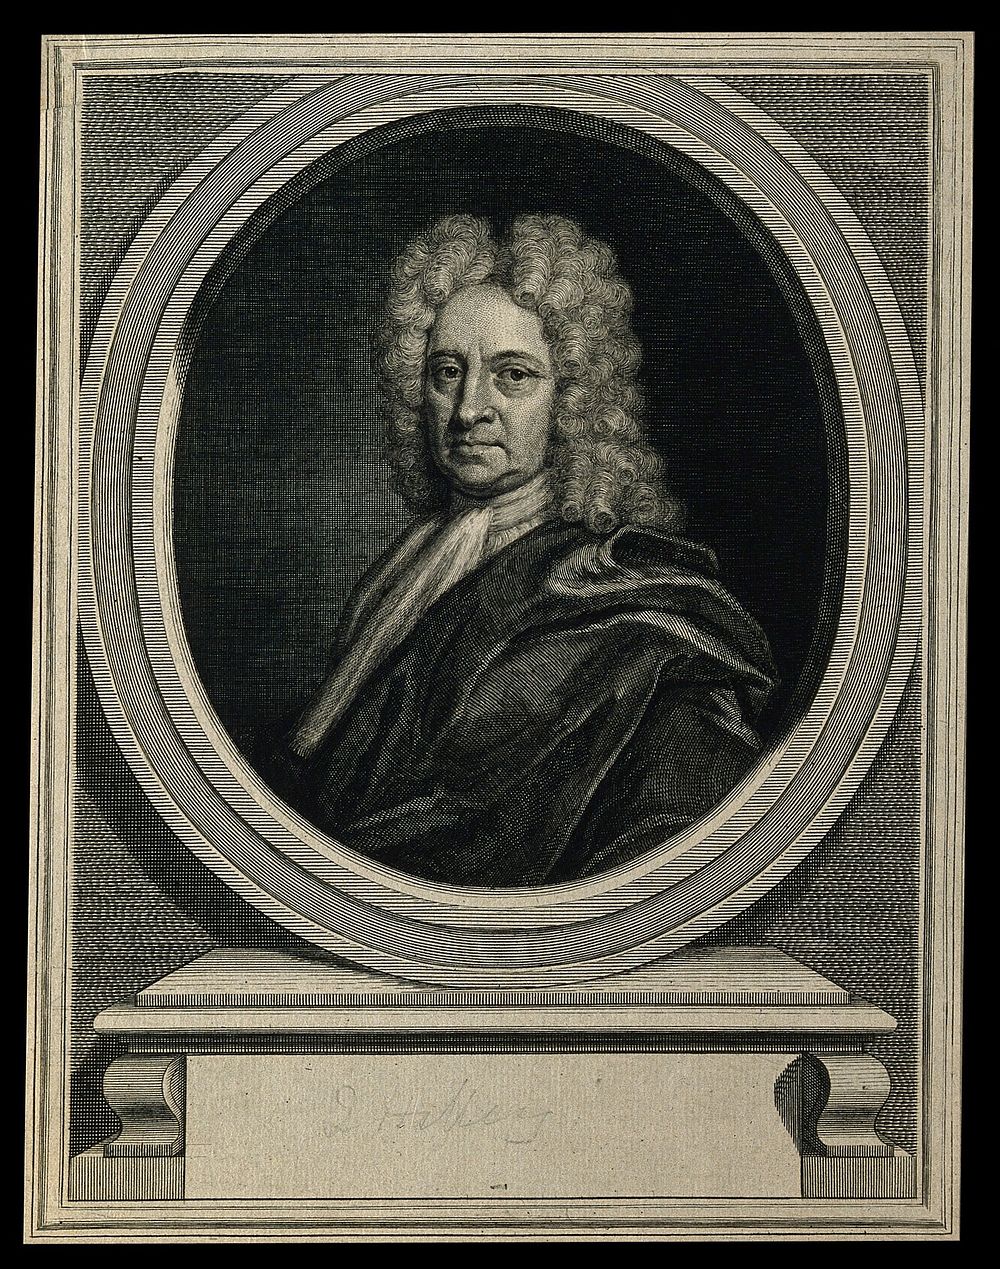 Edmund Halley. Line engraving by G. Vertue after R. Phillips.